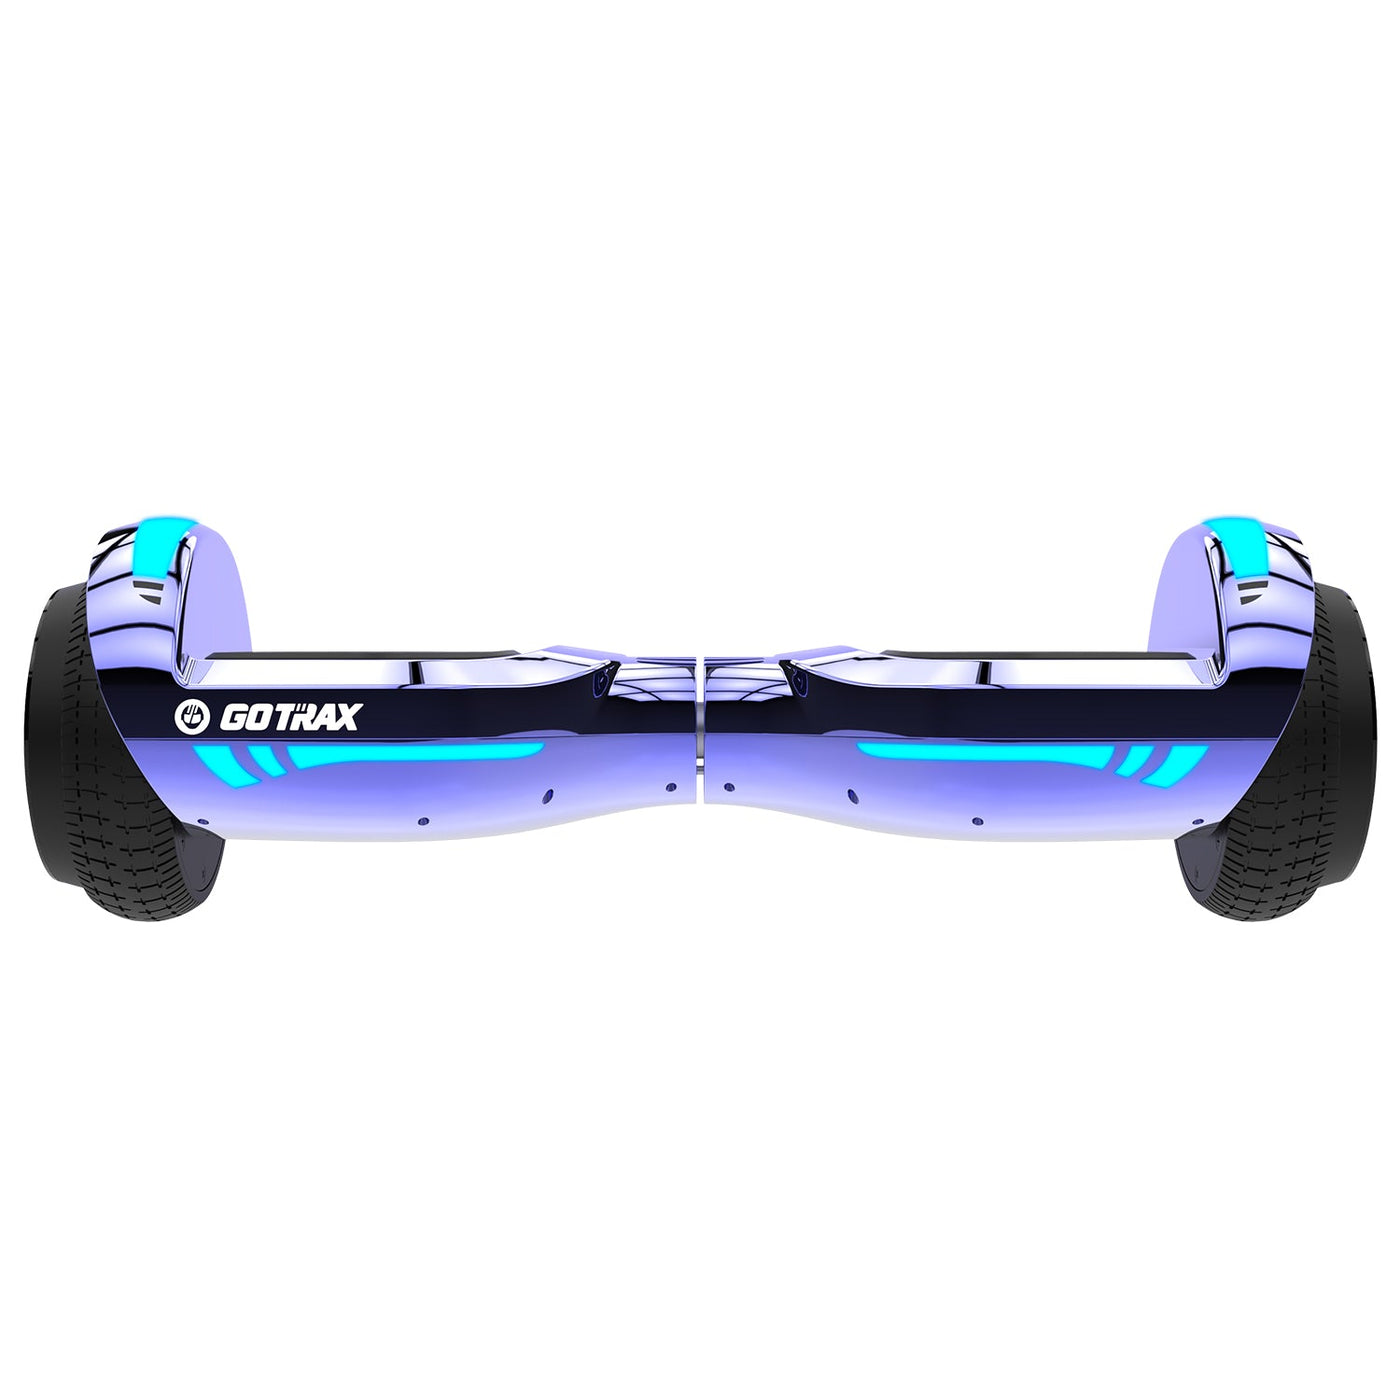 GOTRAX Glide Hoverboard with Infinity Wheels 6.5" - GOTRAX.com